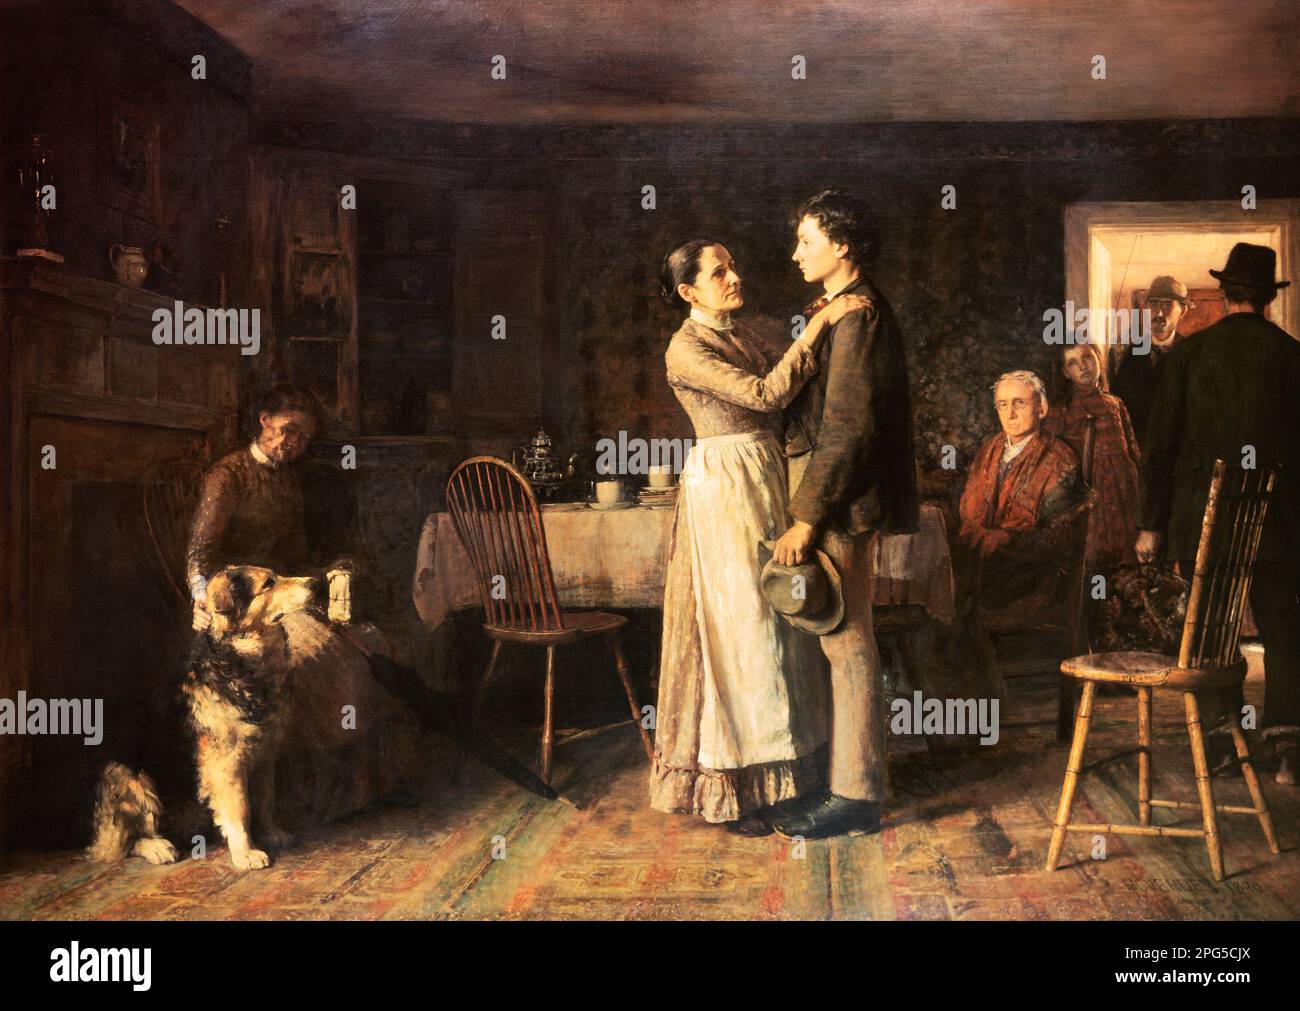 1800s 1890s BREAKING HOME TIES PAINTING BY THOMAS HOVENDEN MOTHER SADLY SAYING GOODBYE TO HER SON  - ka9266 SPL001 HARS OLD TIME FUTURE NOSTALGIA OLD FASHION 1 THOMAS JUVENILE YOUNG ADULT SONS FAMILIES LIFESTYLE FEMALES RURAL SAYING HOME LIFE UNITED STATES COPY SPACE FULL-LENGTH LADIES PERSONS UNITED STATES OF AMERICA CARING MALES EMBRACING MIDDLE-AGED 1800s AGRICULTURE SADNESS NORTH AMERICA MIDDLE-AGED MAN NORTH AMERICAN BREAKING MIDDLE-AGED WOMAN PA PROGRESS DEPARTING FAREWELL TIES LEAVING HOME 1890 GROWTH JUVENILES MOMS THOMAS HOVENDEN YOUNG ADULT MAN CAUCASIAN ETHNICITY OLD FASHIONED SADLY Stock Photo